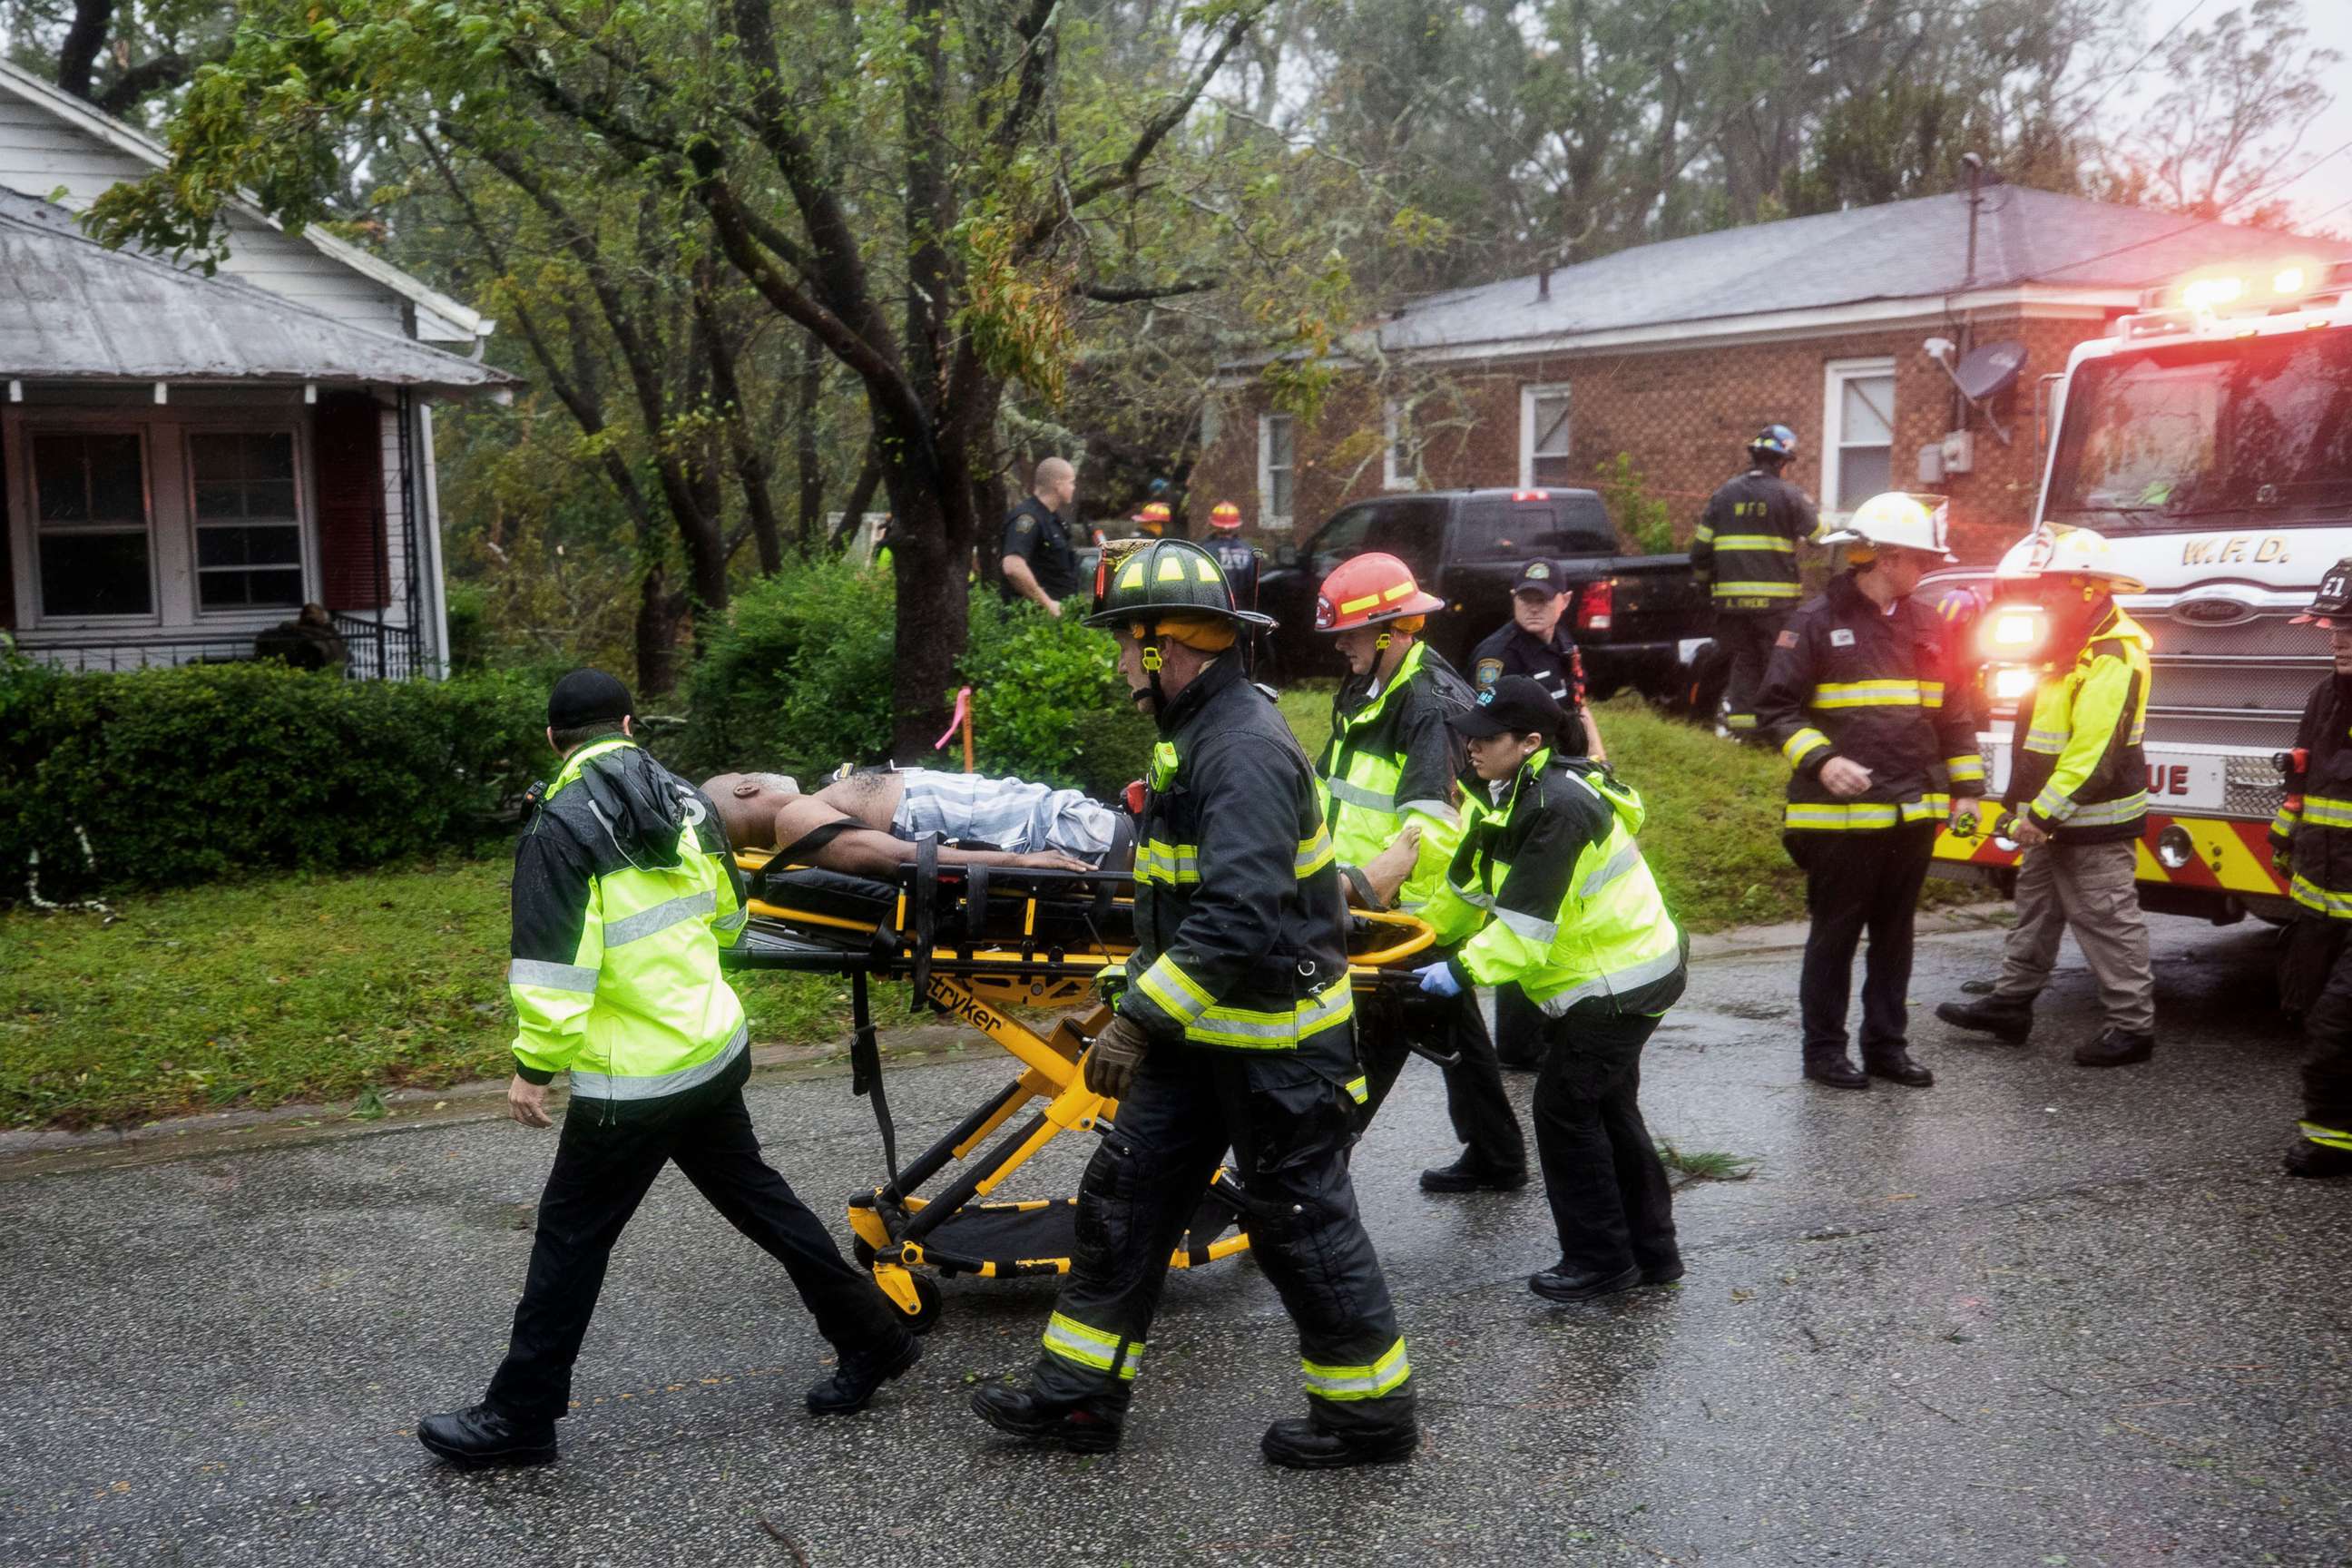 PHOTO: Rescue workers rush a man to an ambulance after a giant tree fell on a house in Wilmington, N.C. as Hurricane Florence came ashore, Sept. 14, 2018.